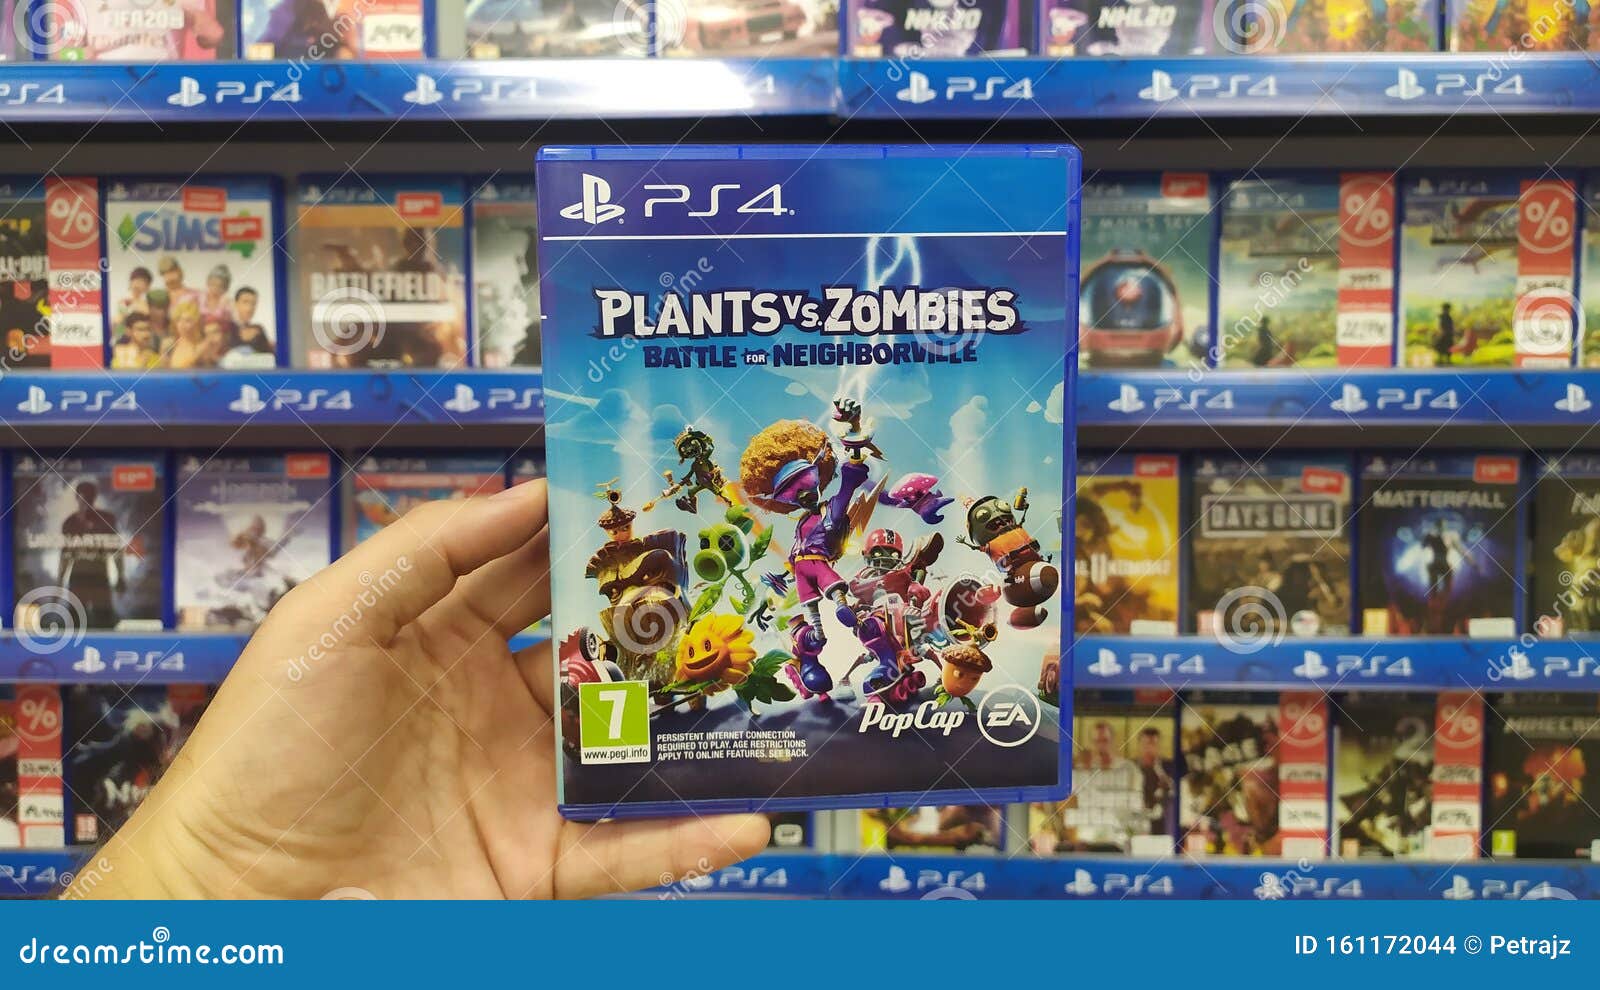 Man Holding Vs Zombies: Battle for Neighborville Videogame on Sony Playstation 4 Console in Store Editorial Stock Image - Image of battle, controller: 161172044